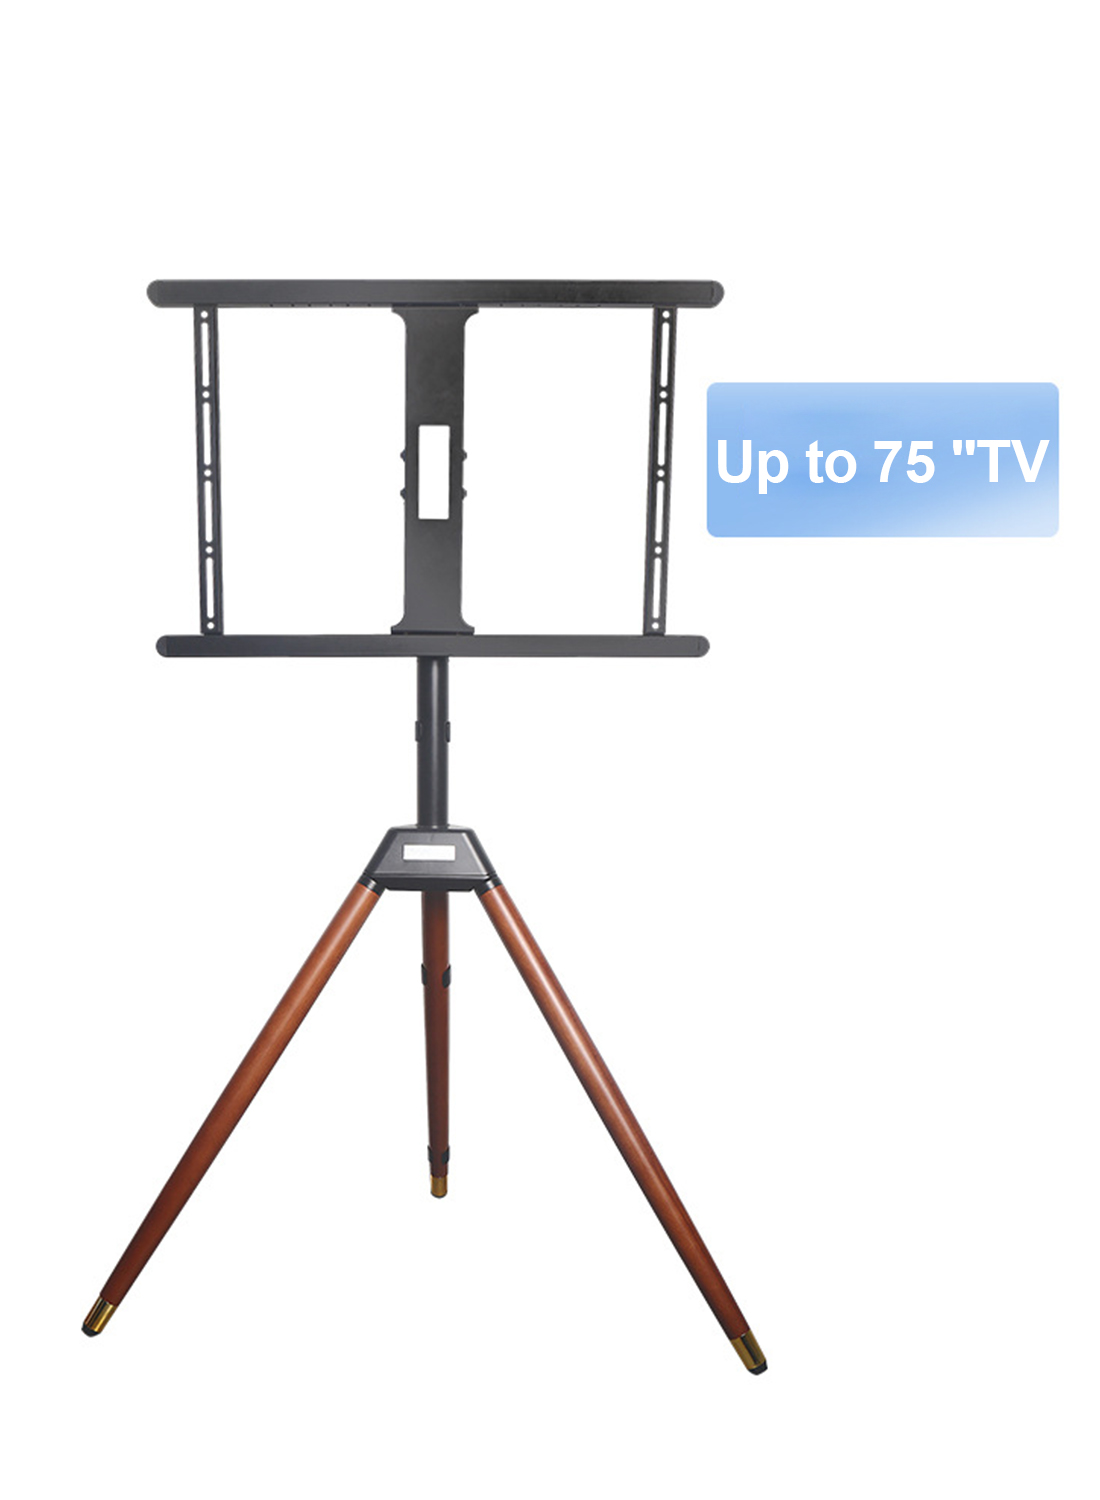 Wood TV Stand With Tripod Base For 32-75 Inch Screens, Height Adjustable TV Floor Stand 180°Swivel Portable TV Mount Stand For Bedroom, Living Room, Studio